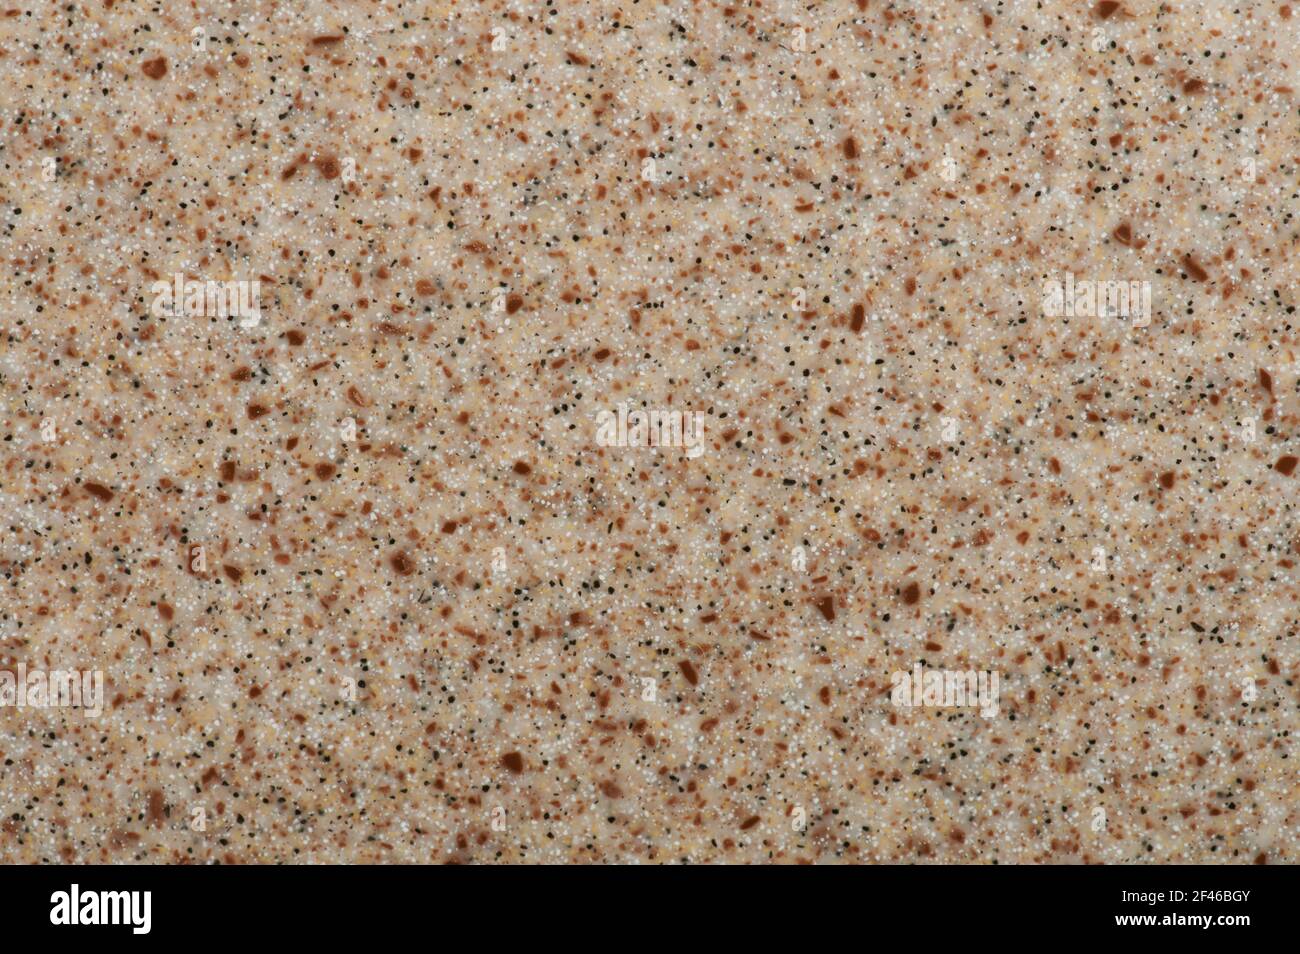 Surface of brown smooth stone background close up view Stock Photo